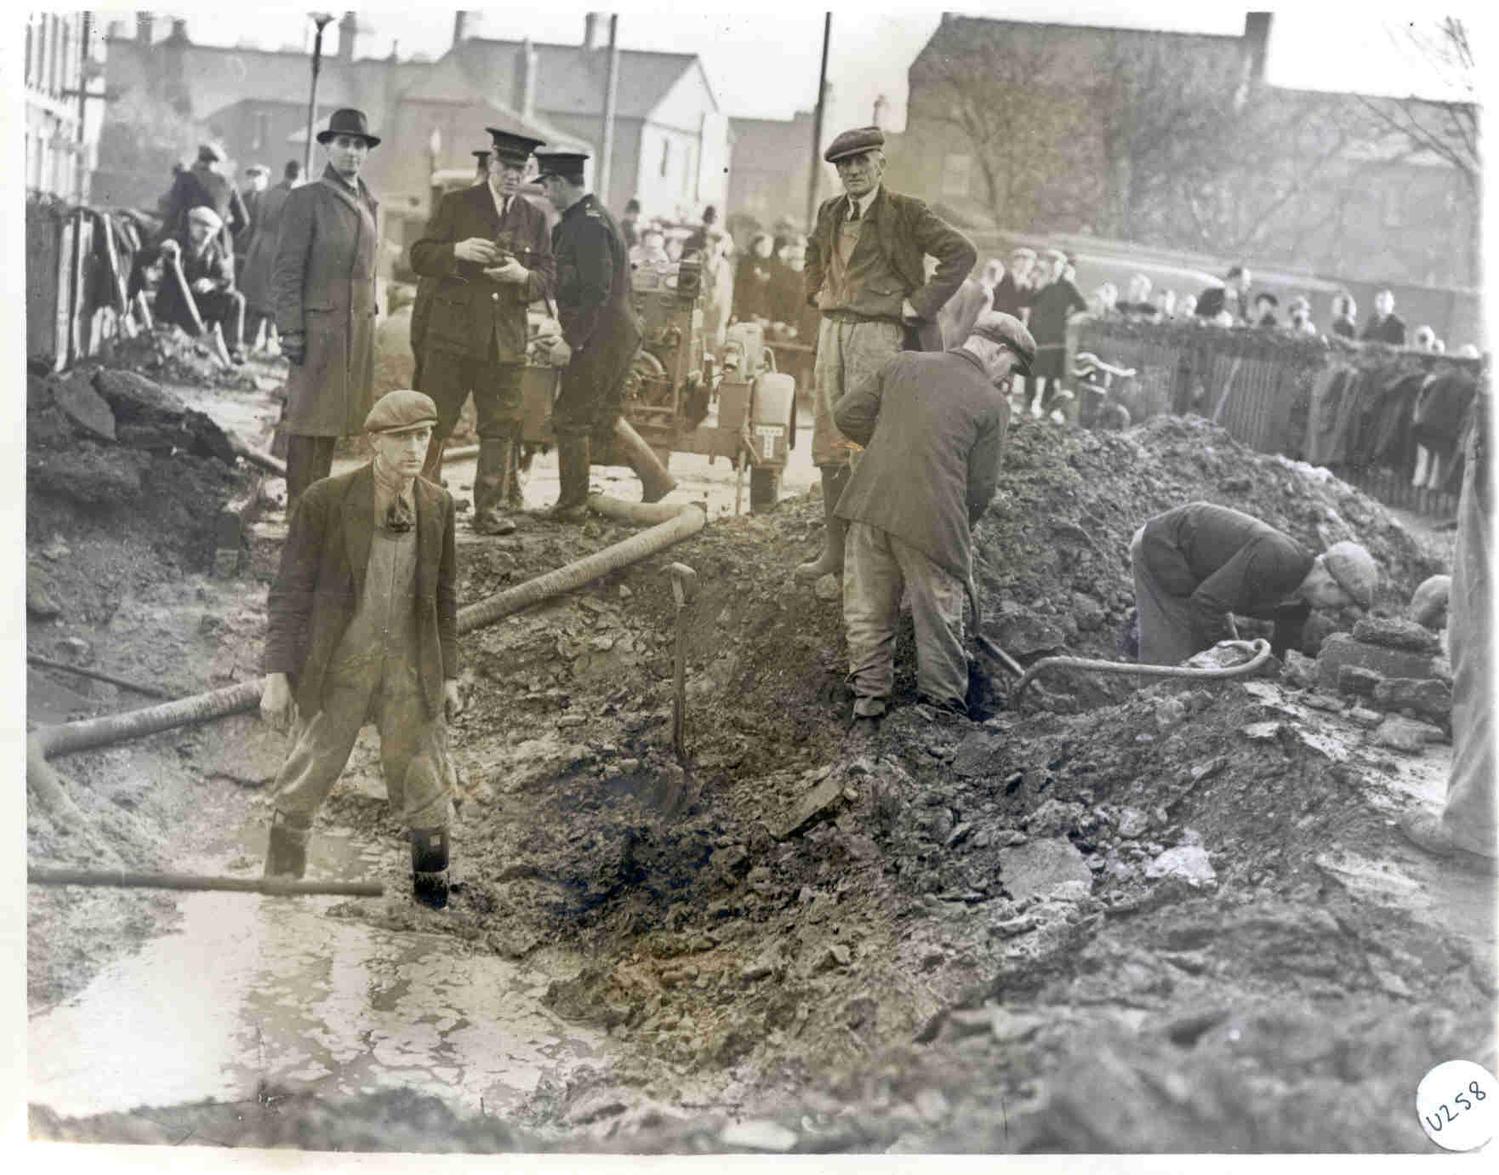 Repairing damaged services after an air raid in London Road, 1940.